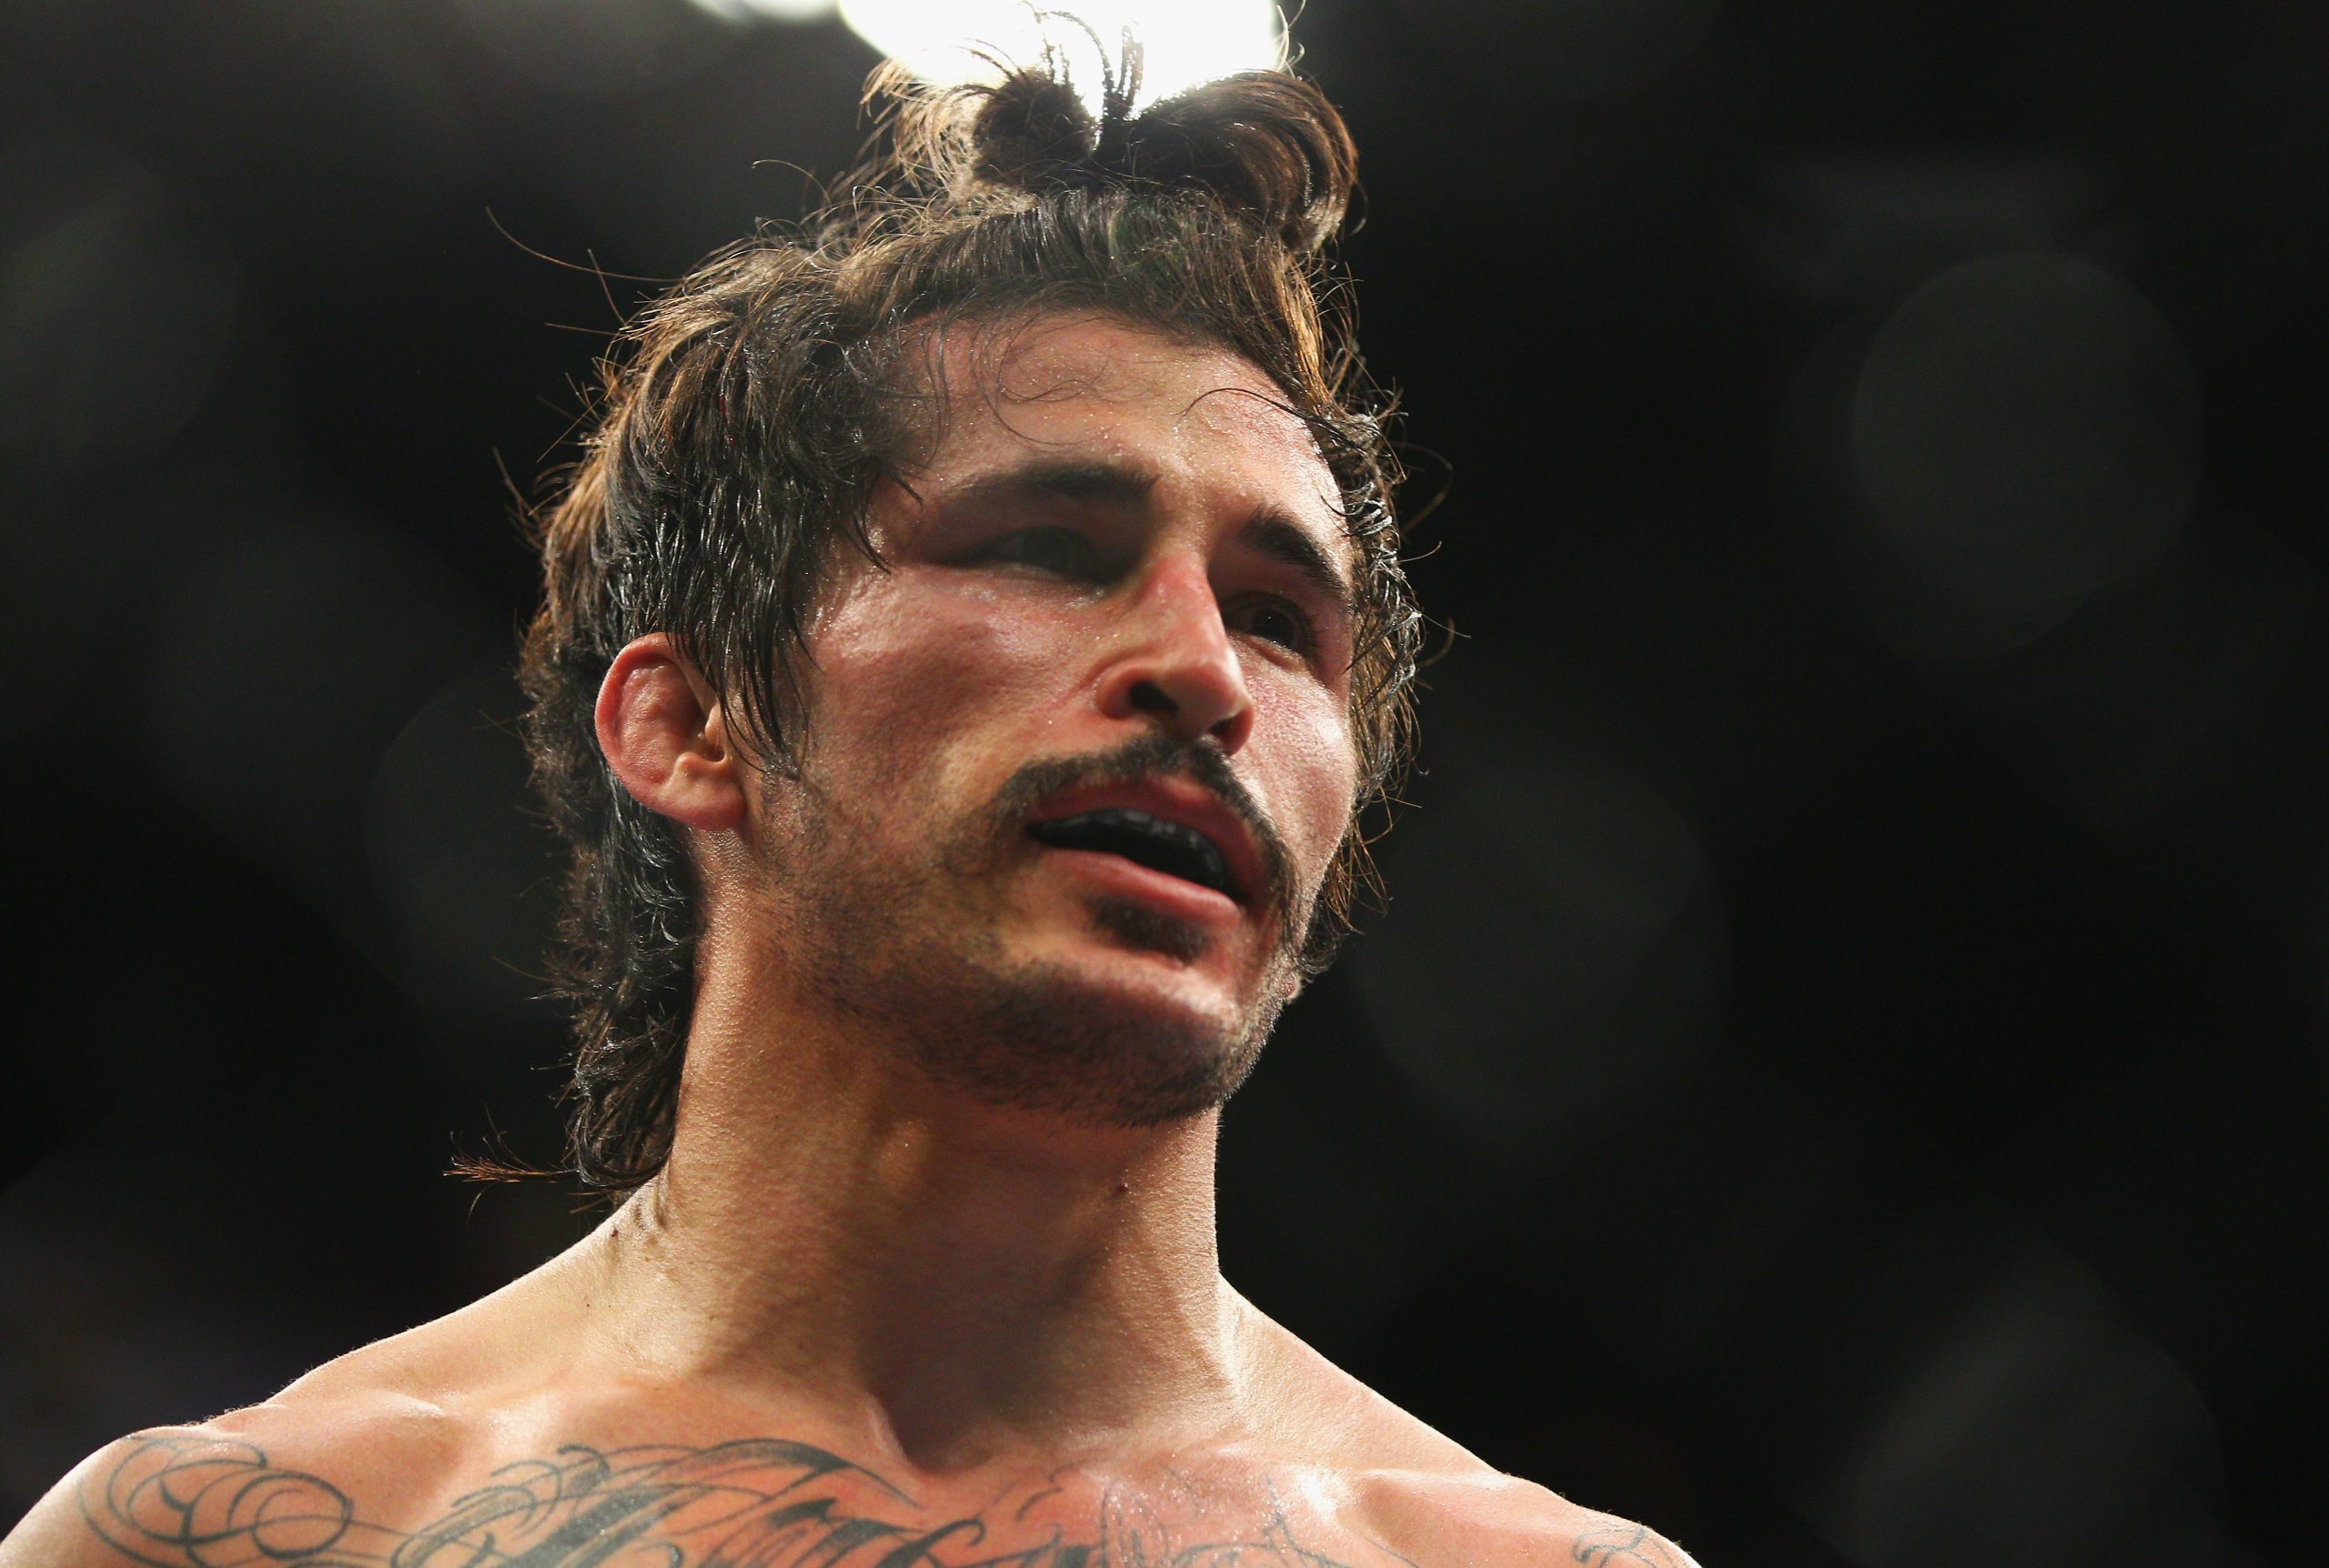 Ian McCall retired from MMA in 2018